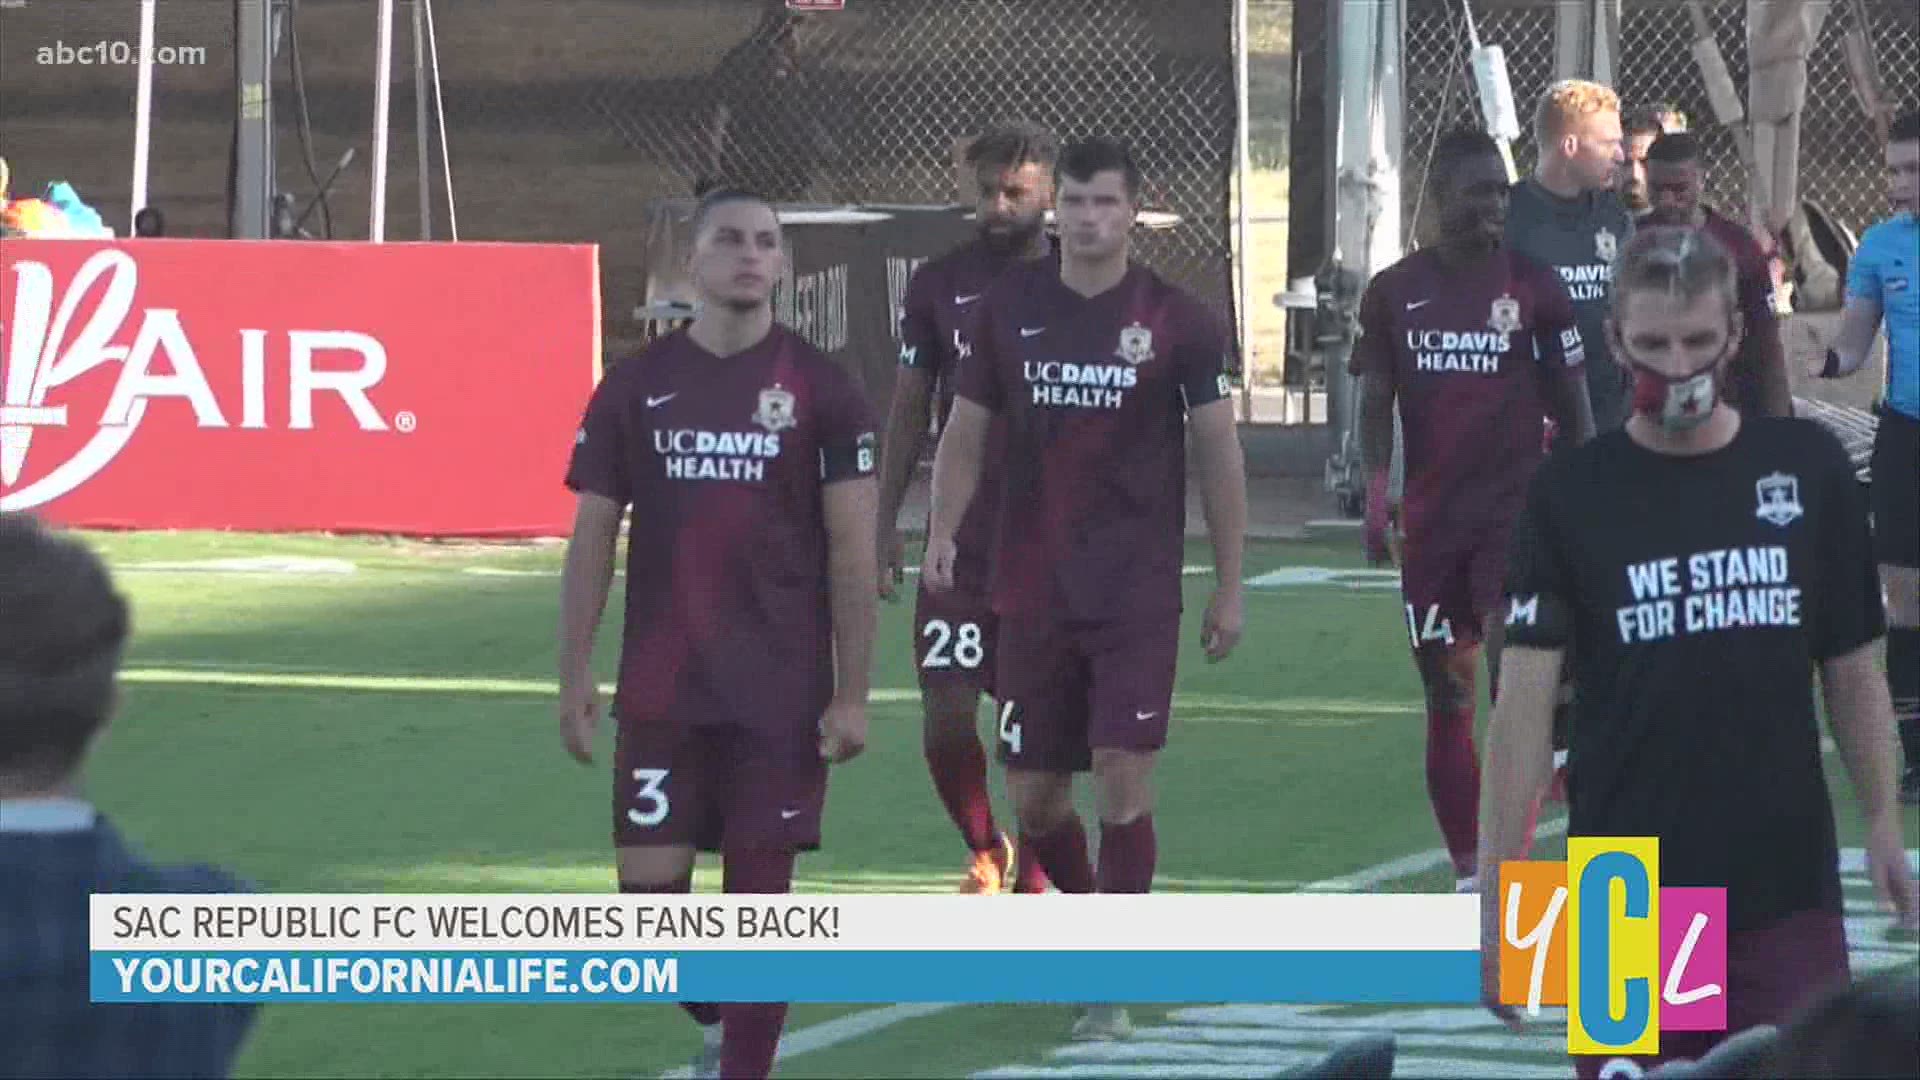 Sacramento Republic FC is ready to welcome fans back into Papa Murphy's Park. Hear about the safety measures being implemented, along with upcoming events for kids.